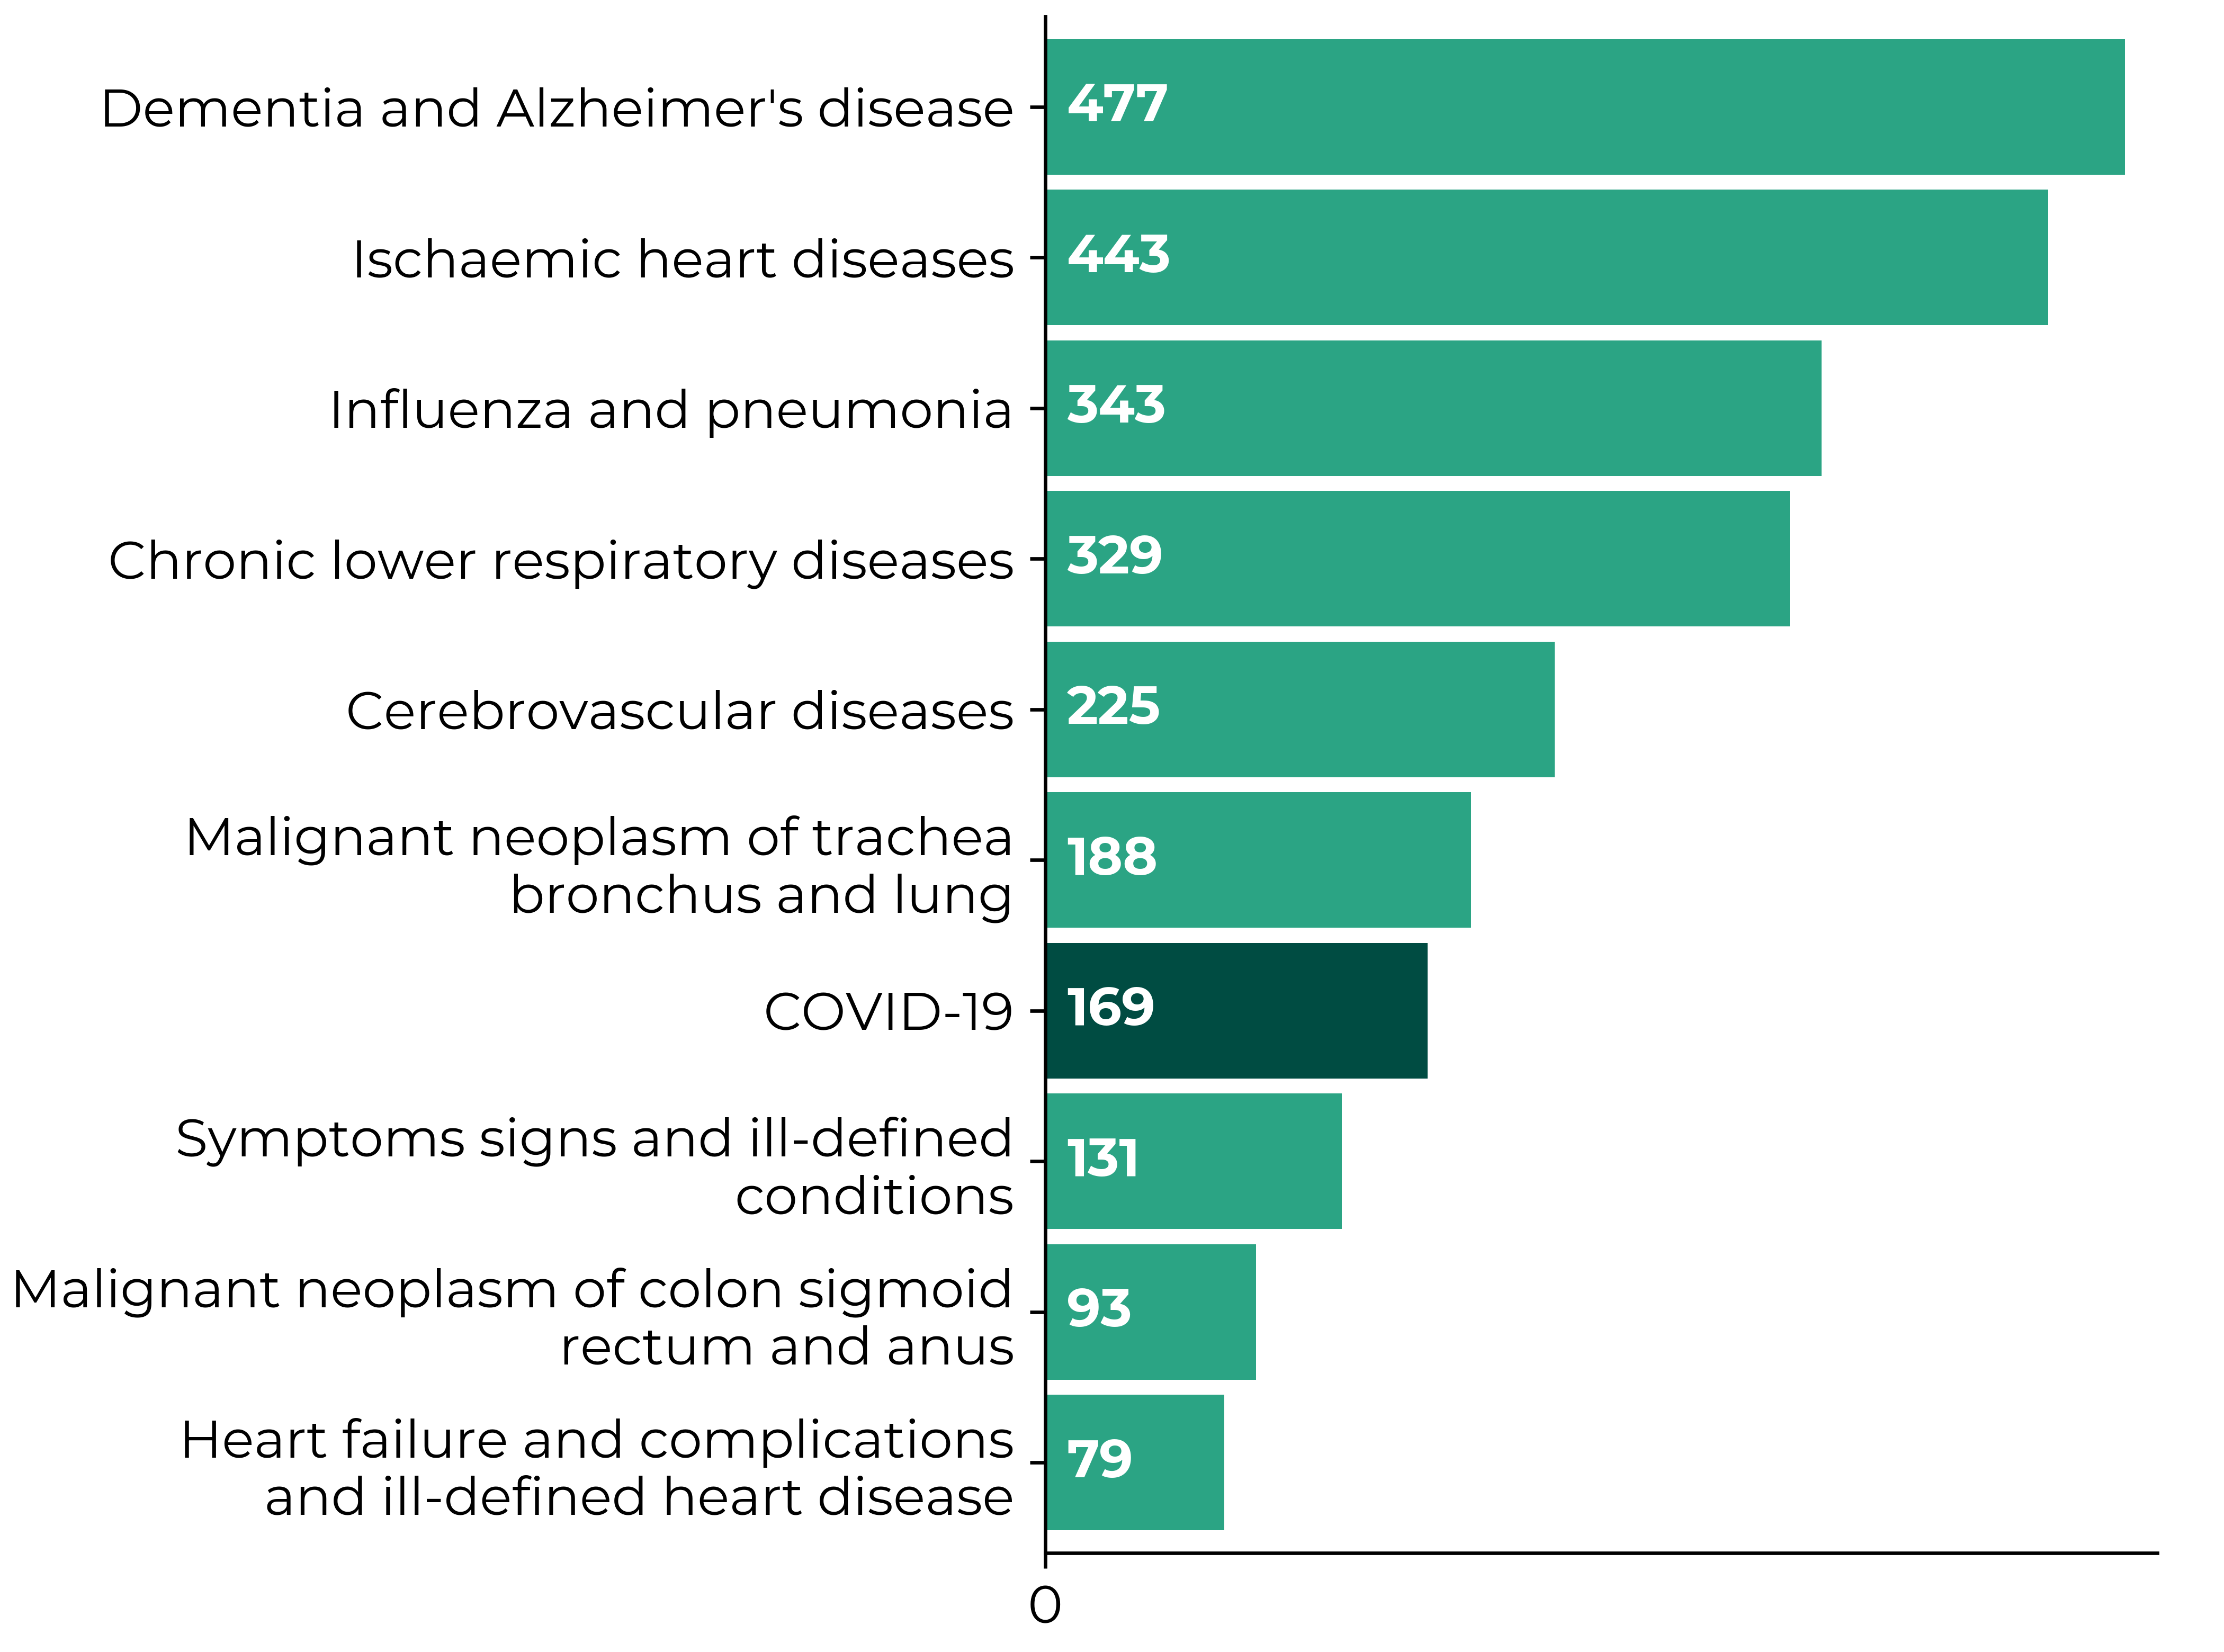 Dementia and Alzheimer's disease 477, Ischaemic heart diseases 443, , Influenza and pneumonia 343, Chronic lower respiratory diseases 329, Cerebrovascular diseases 225, Malignant neoplasm of trachea bronchus and lung 188, COVID-19 169, Symptoms signs and ill-defined conditions 131Malignant neoplasm of colon sigmoid rectum and anus 93, Heart failure and complications and ill-defined heart disease 79.